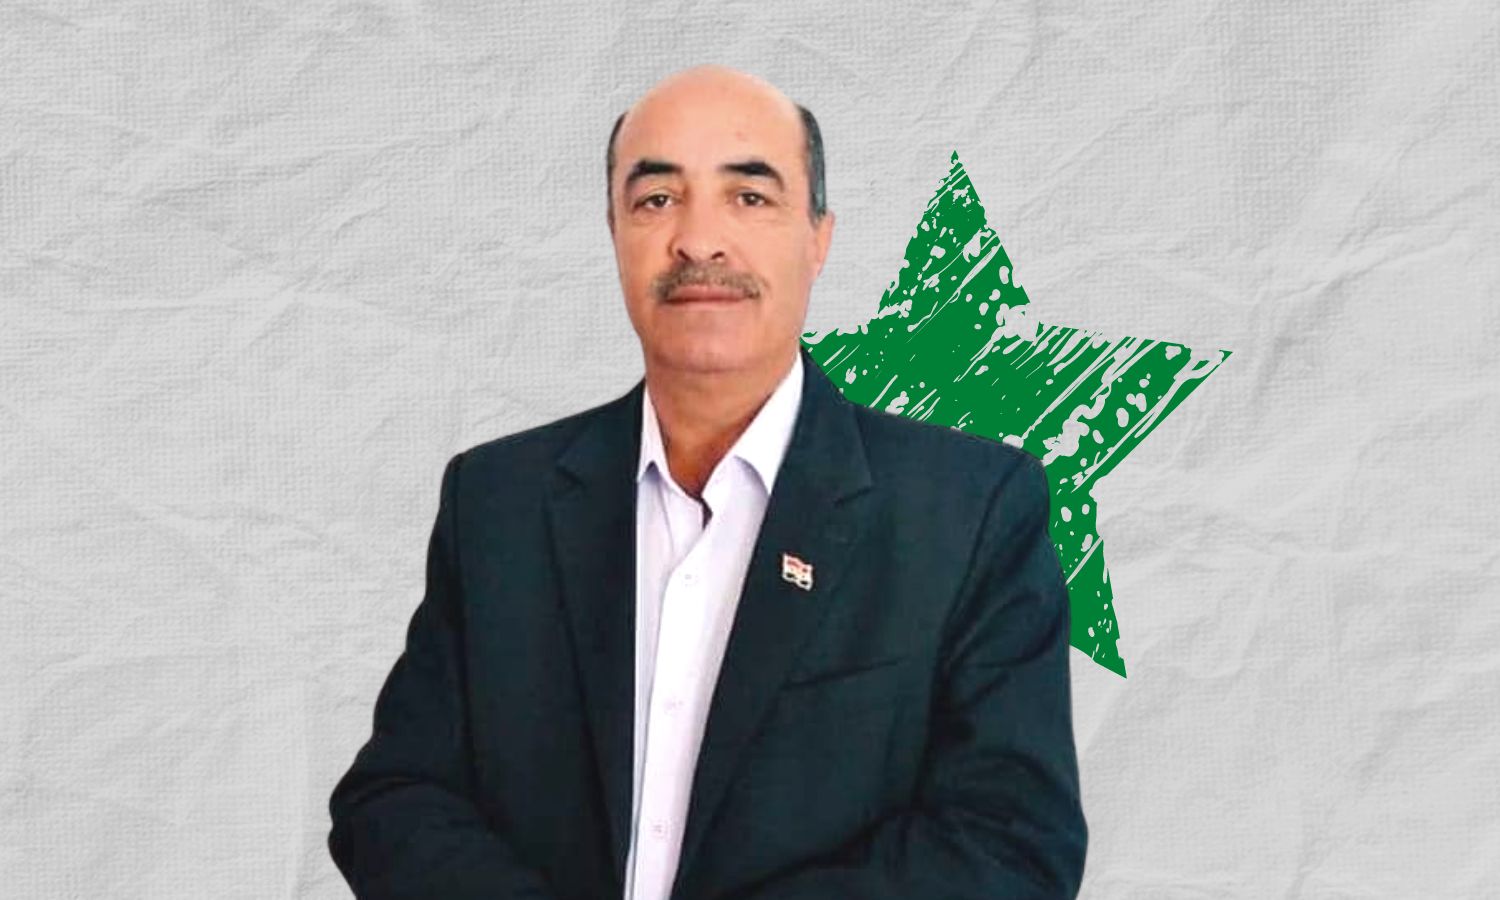 Salama al-Qaddah, the division secretary of the Baath Party in the town of al-Harak in the northeastern countryside of Daraa (edited by Enab Baladi)